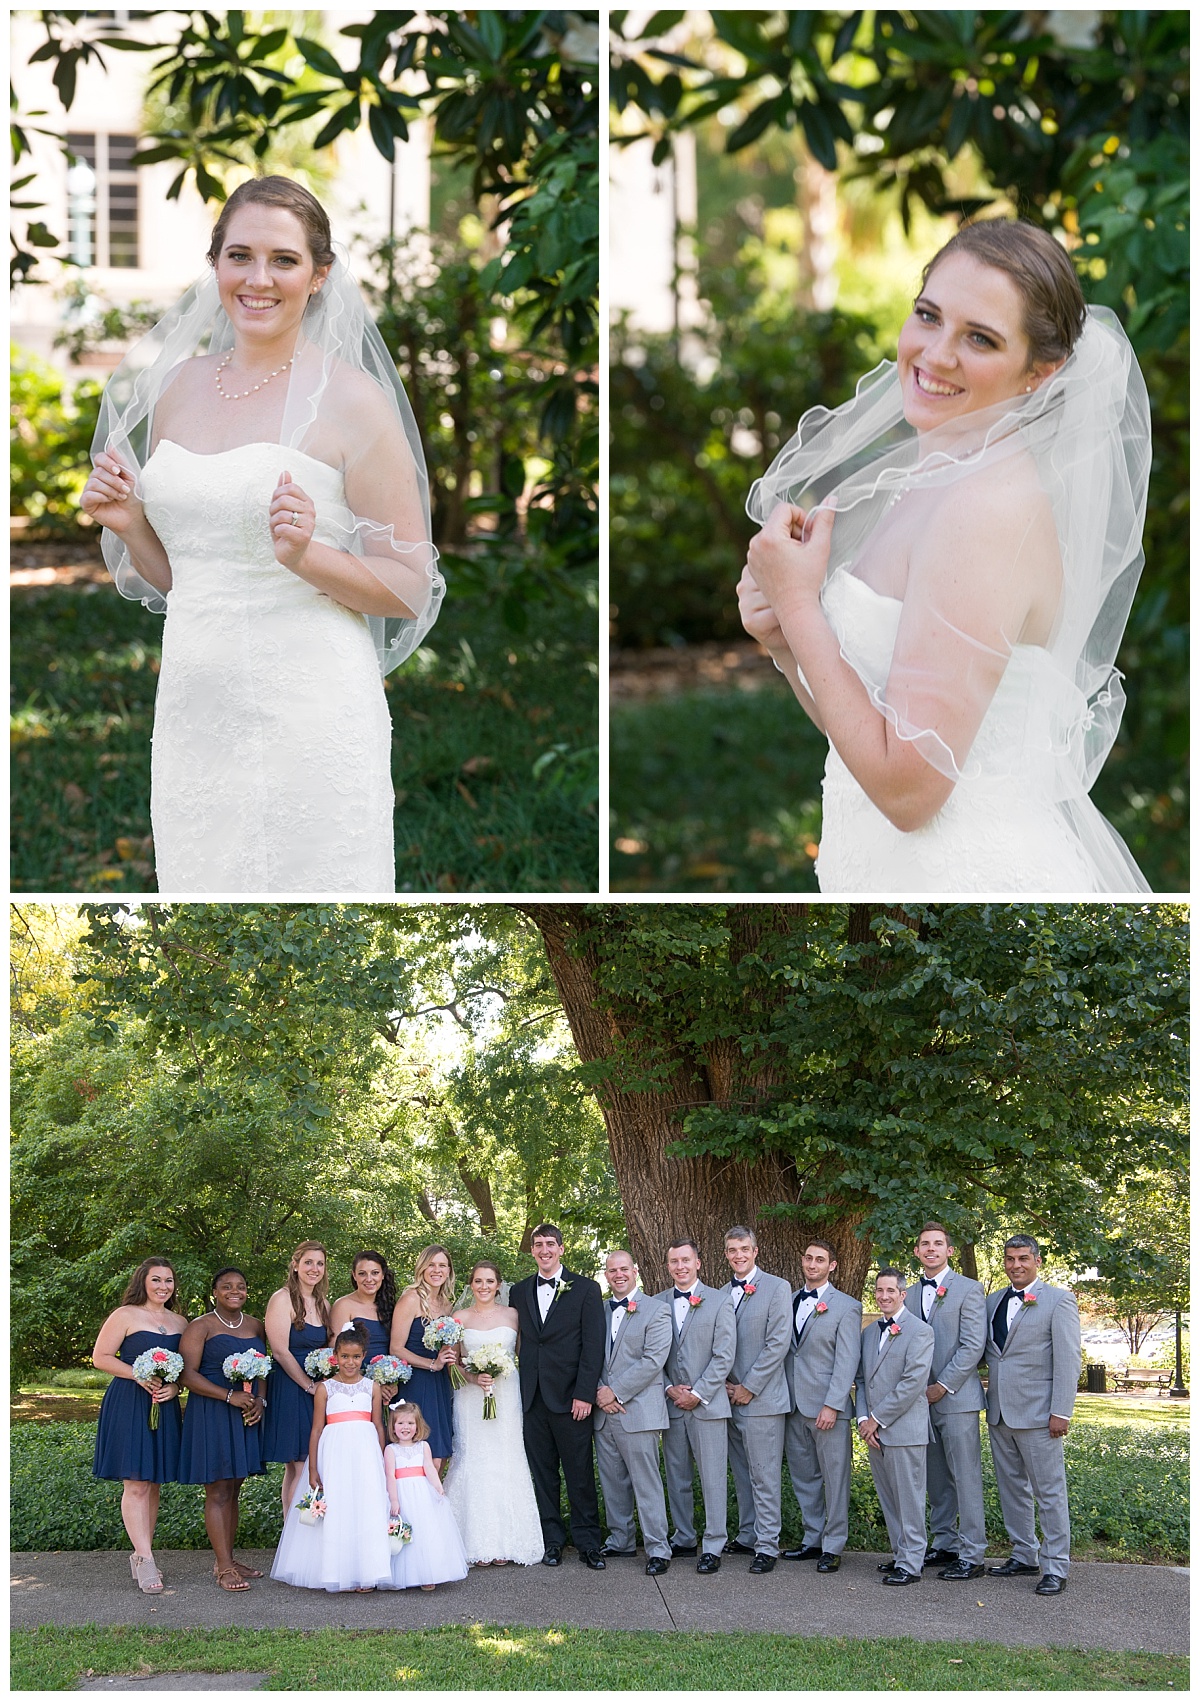 Wedding party in navy and grey